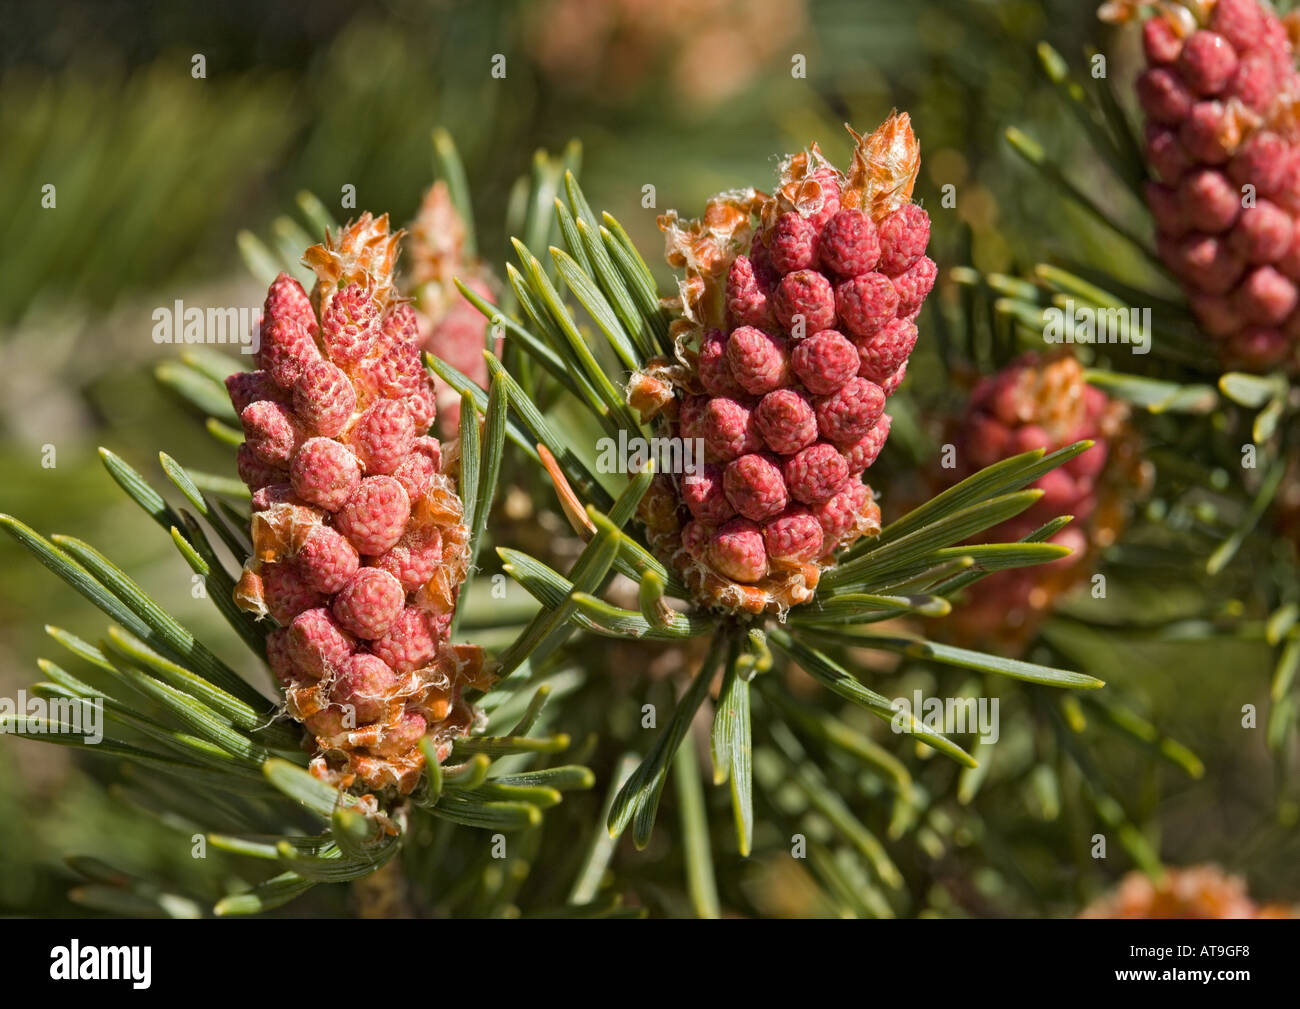 Scots pine with unusually red male flowers Pinus sylvestris Stock Photo